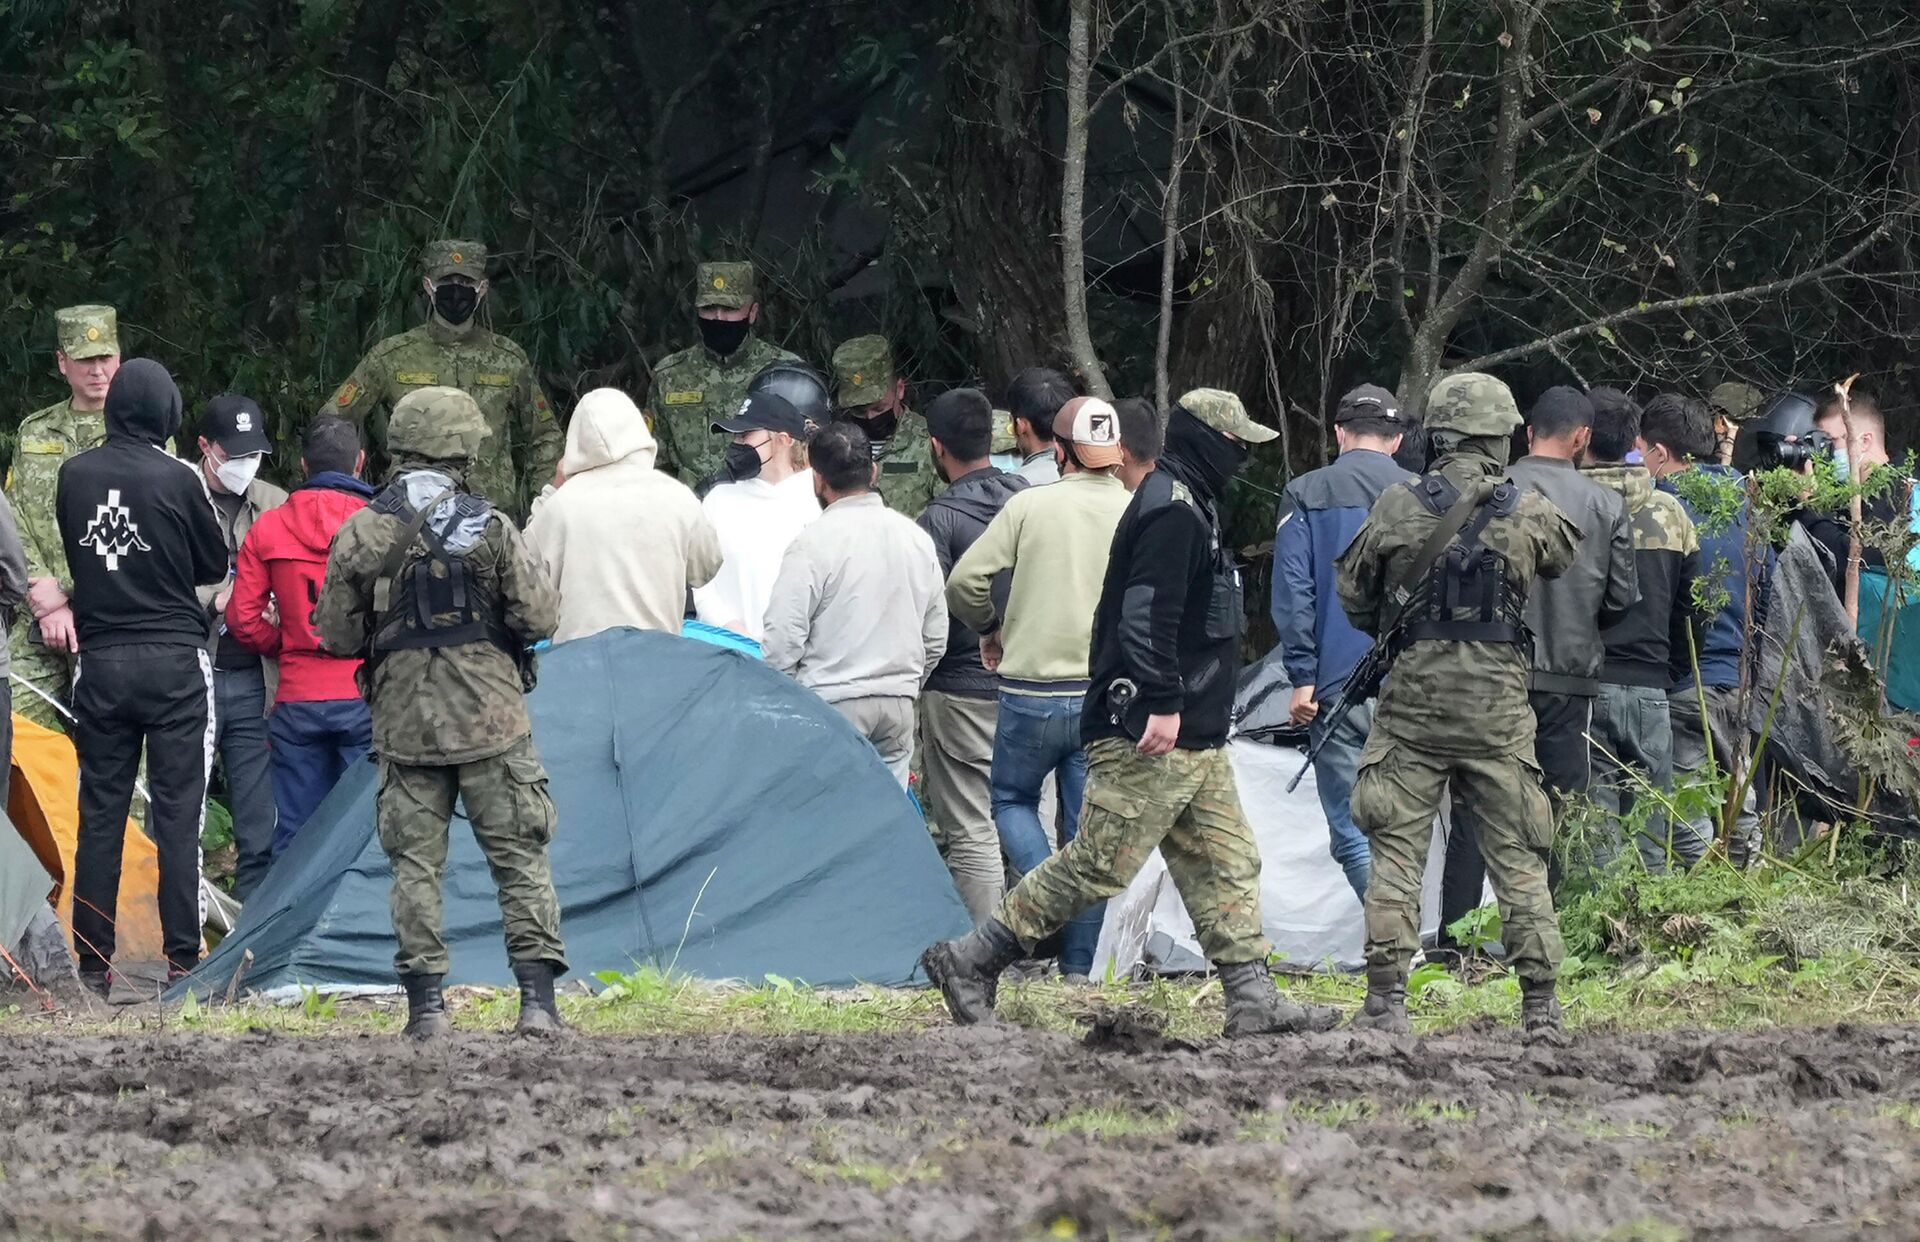  Polish security forces block migrants on the border with Belarus in Usnarz Gorny, Poland, on Wednesday, Sept. 1, 2021.  - Sputnik International, 1920, 11.11.2021